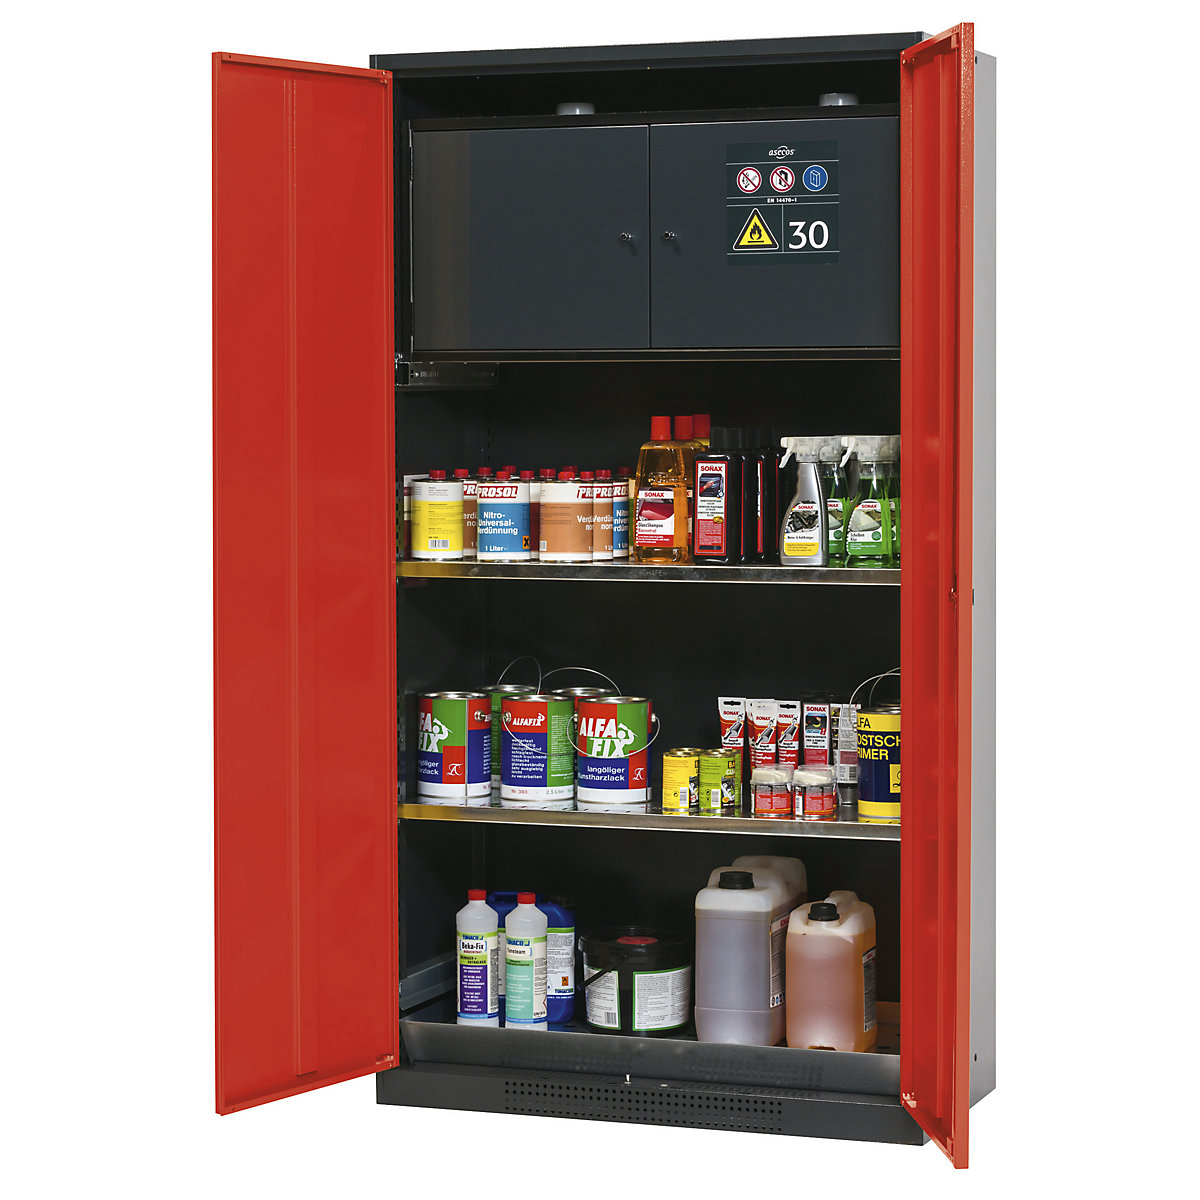 Chemical storage cupboard – asecos, solid door, with type 30 hazardous goods storage box, traffic red-2